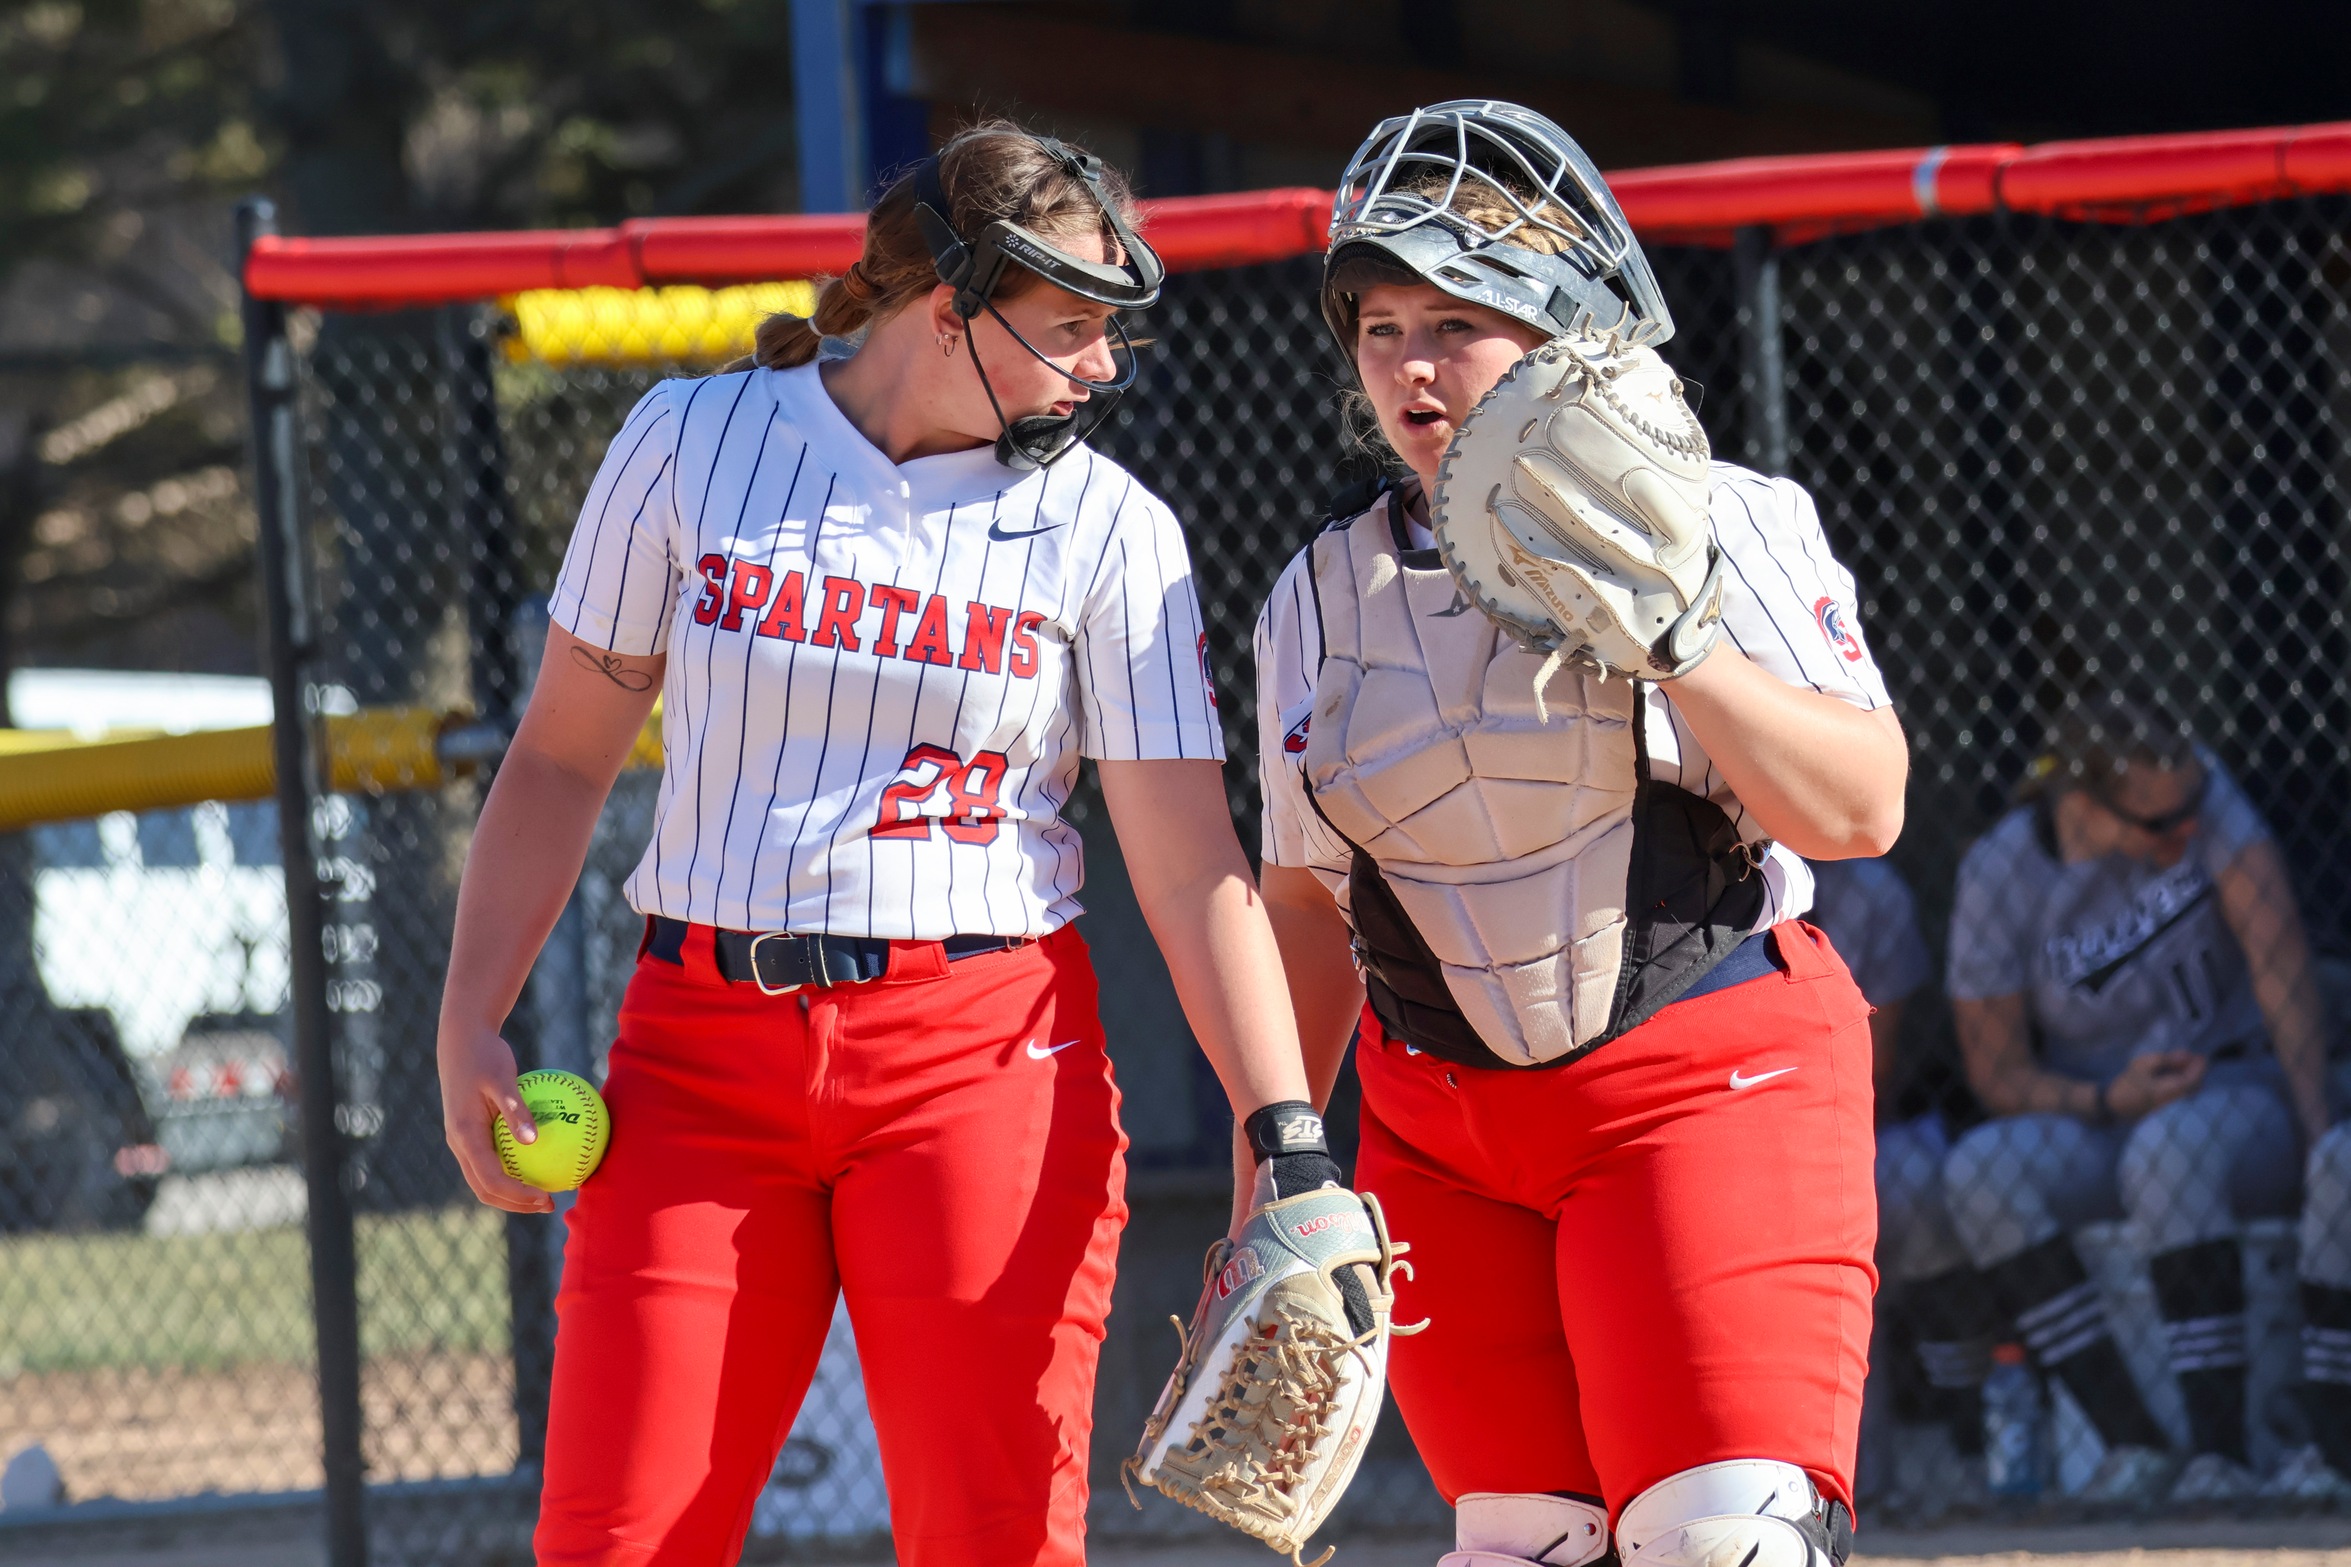 SPARTAN SOFTBALL SUFFERS LOSSES IN WEEKEND DOUBLE-HEADER AGAINST SOUTHEASTERN